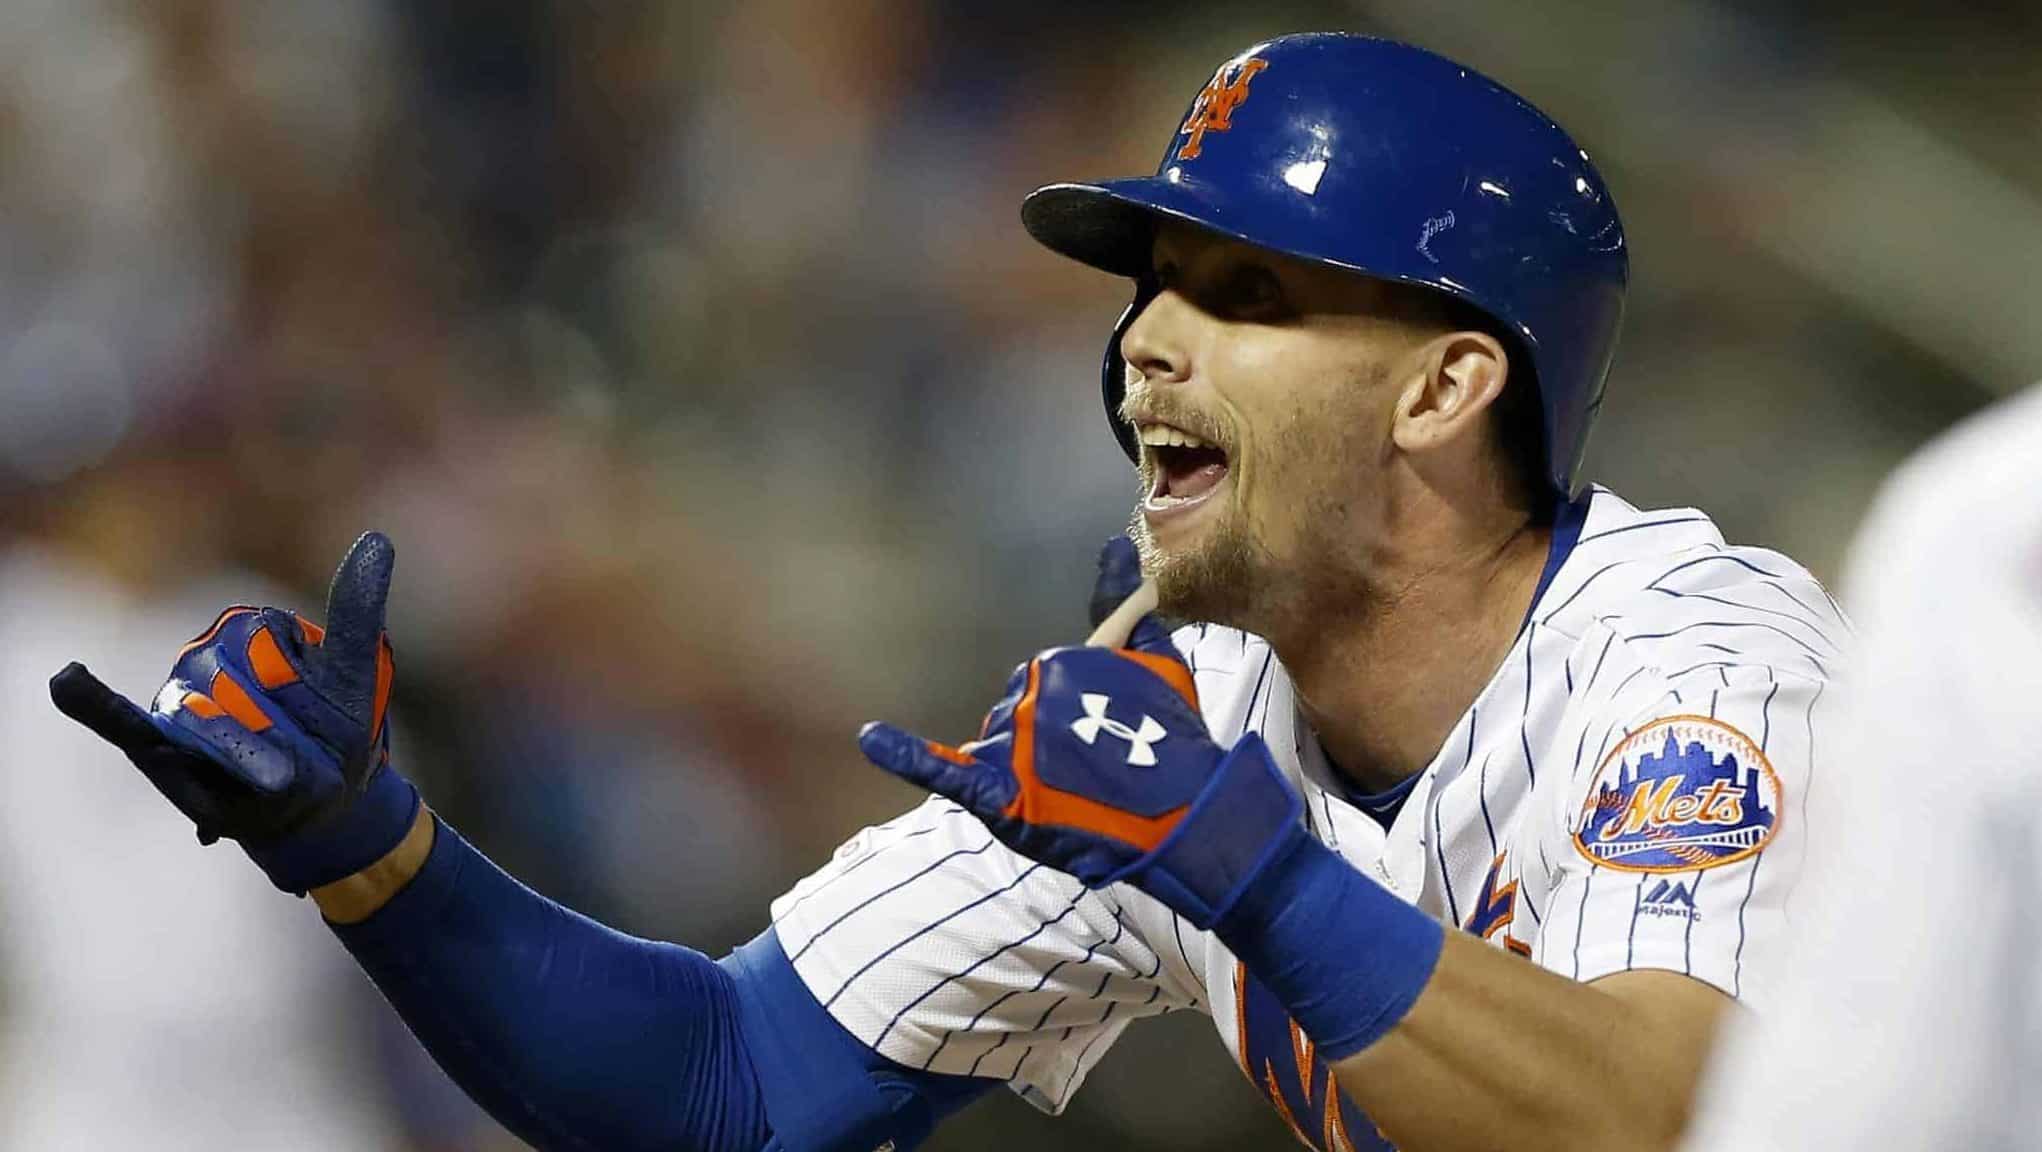 NEW YORK, NEW YORK - JUNE 30: Jeff McNeil #6 of the New York Mets reacts after his eighth inning two RBI single against the Atlanta Braves at Citi Field on June 30, 2019 in New York City.